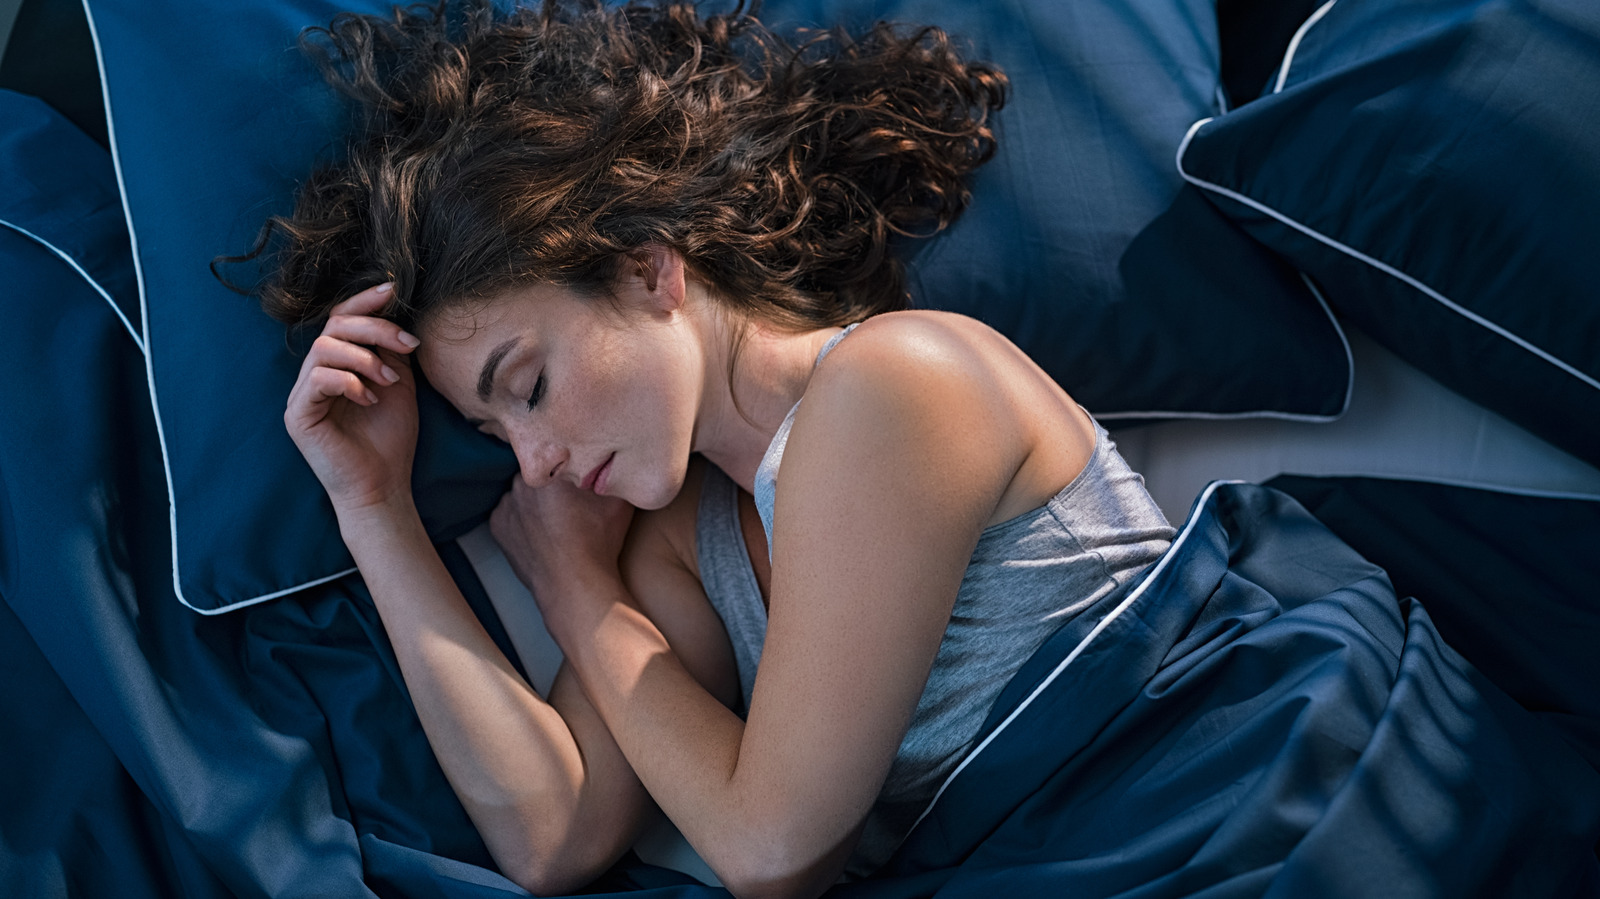 The Sleep Supplement That Works Better Than Melatonin And Helps You Wake Up Energized